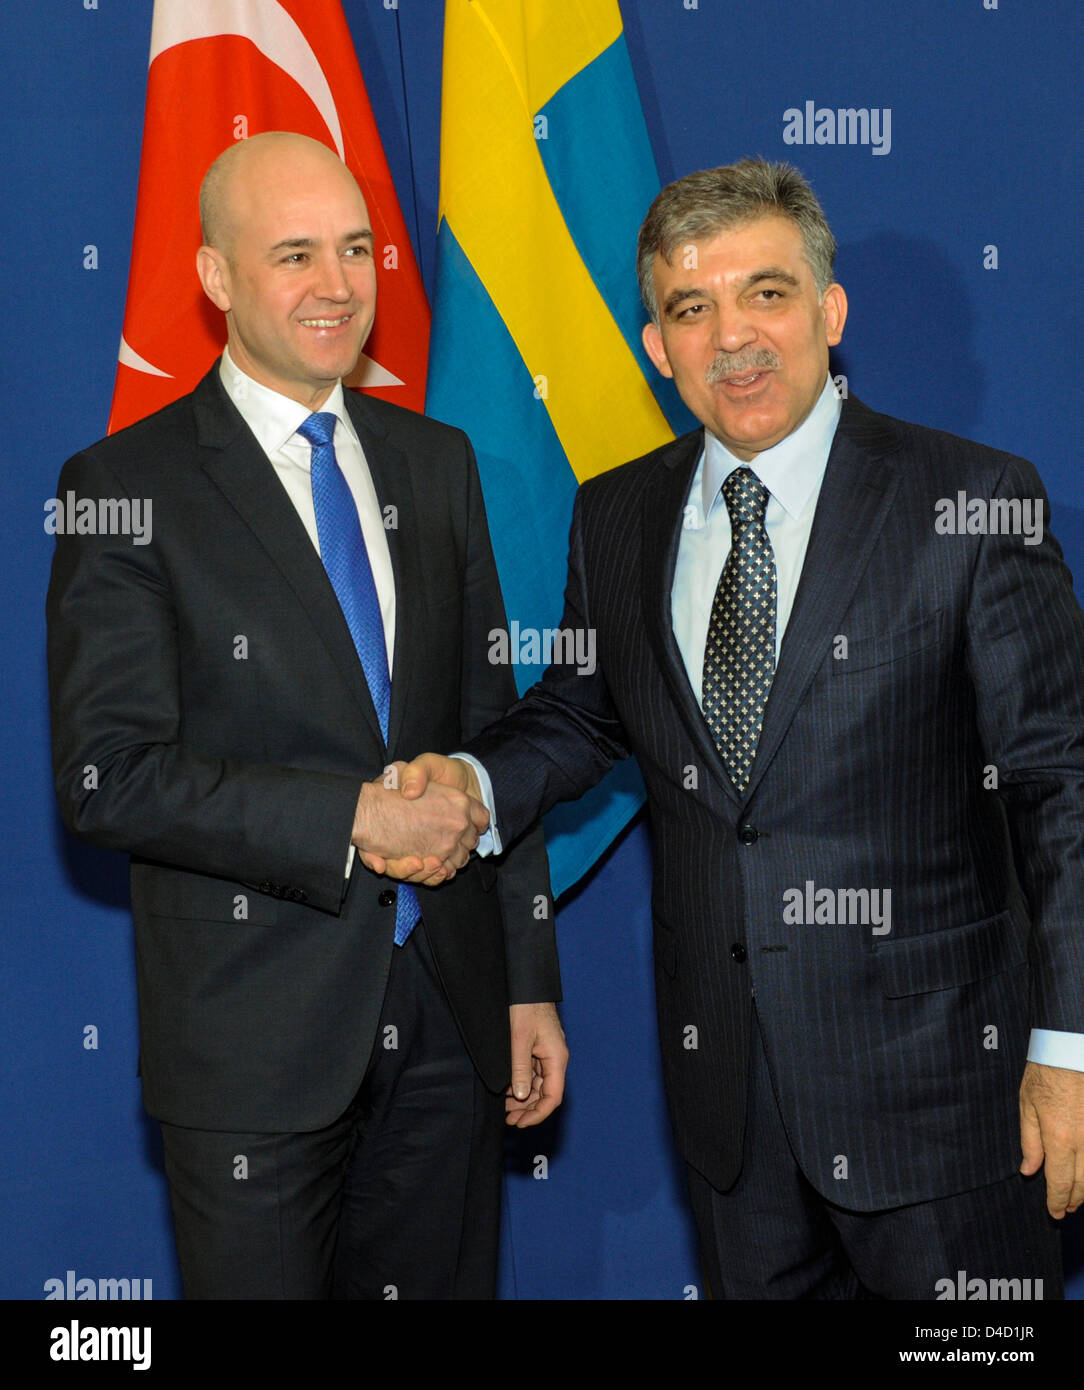 Stockholm, Sweden. 12th March 2013. State visit by President Dr Abdullah Gül of Turkey - In the picture  the President meets Prime Minister Fredrik Reinfeldt-  Credit:  Rolf Adlercreutz / Alamy Live News Stock Photo